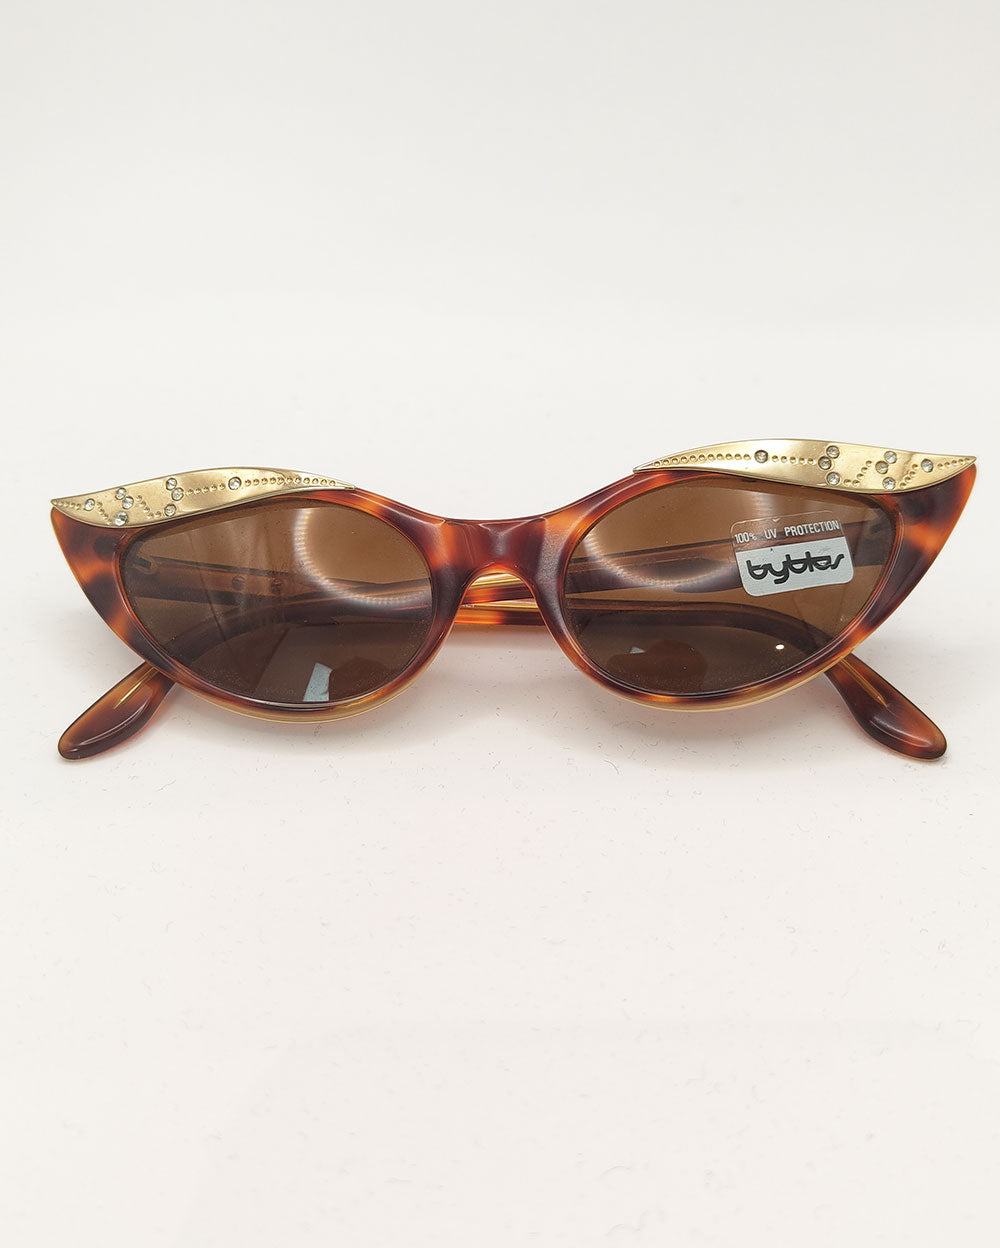 An image of a pair of vintage Byblos sunglasses in a brown tortoiseshell with rhinestone beaded cat eye lens.